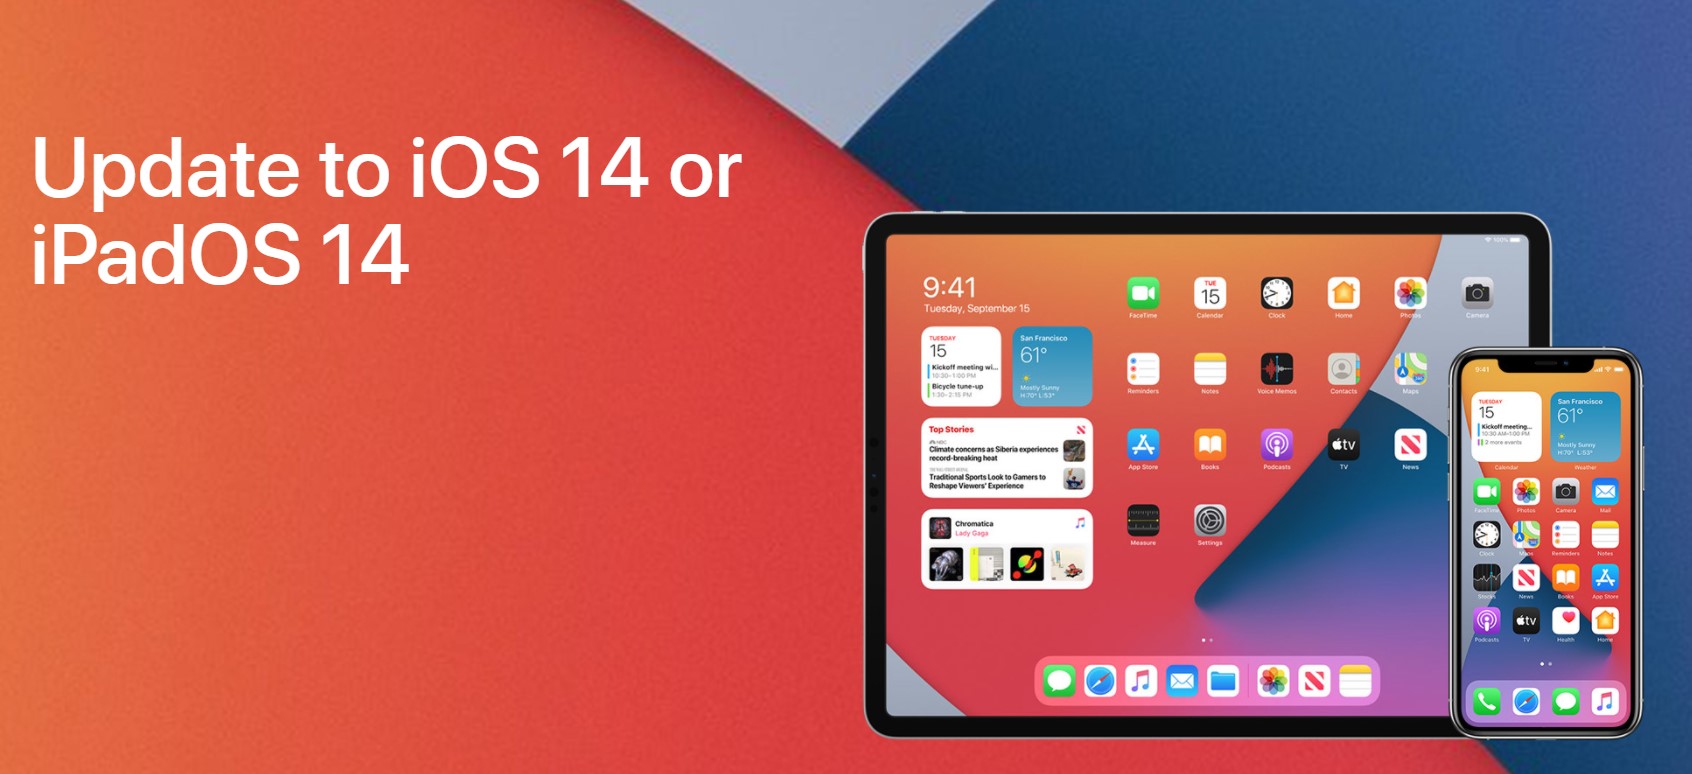 How to update to iOS 14 or iPadOS 14 - Download iOS 14, iPad OS 14, and tvOS 14 IPSW